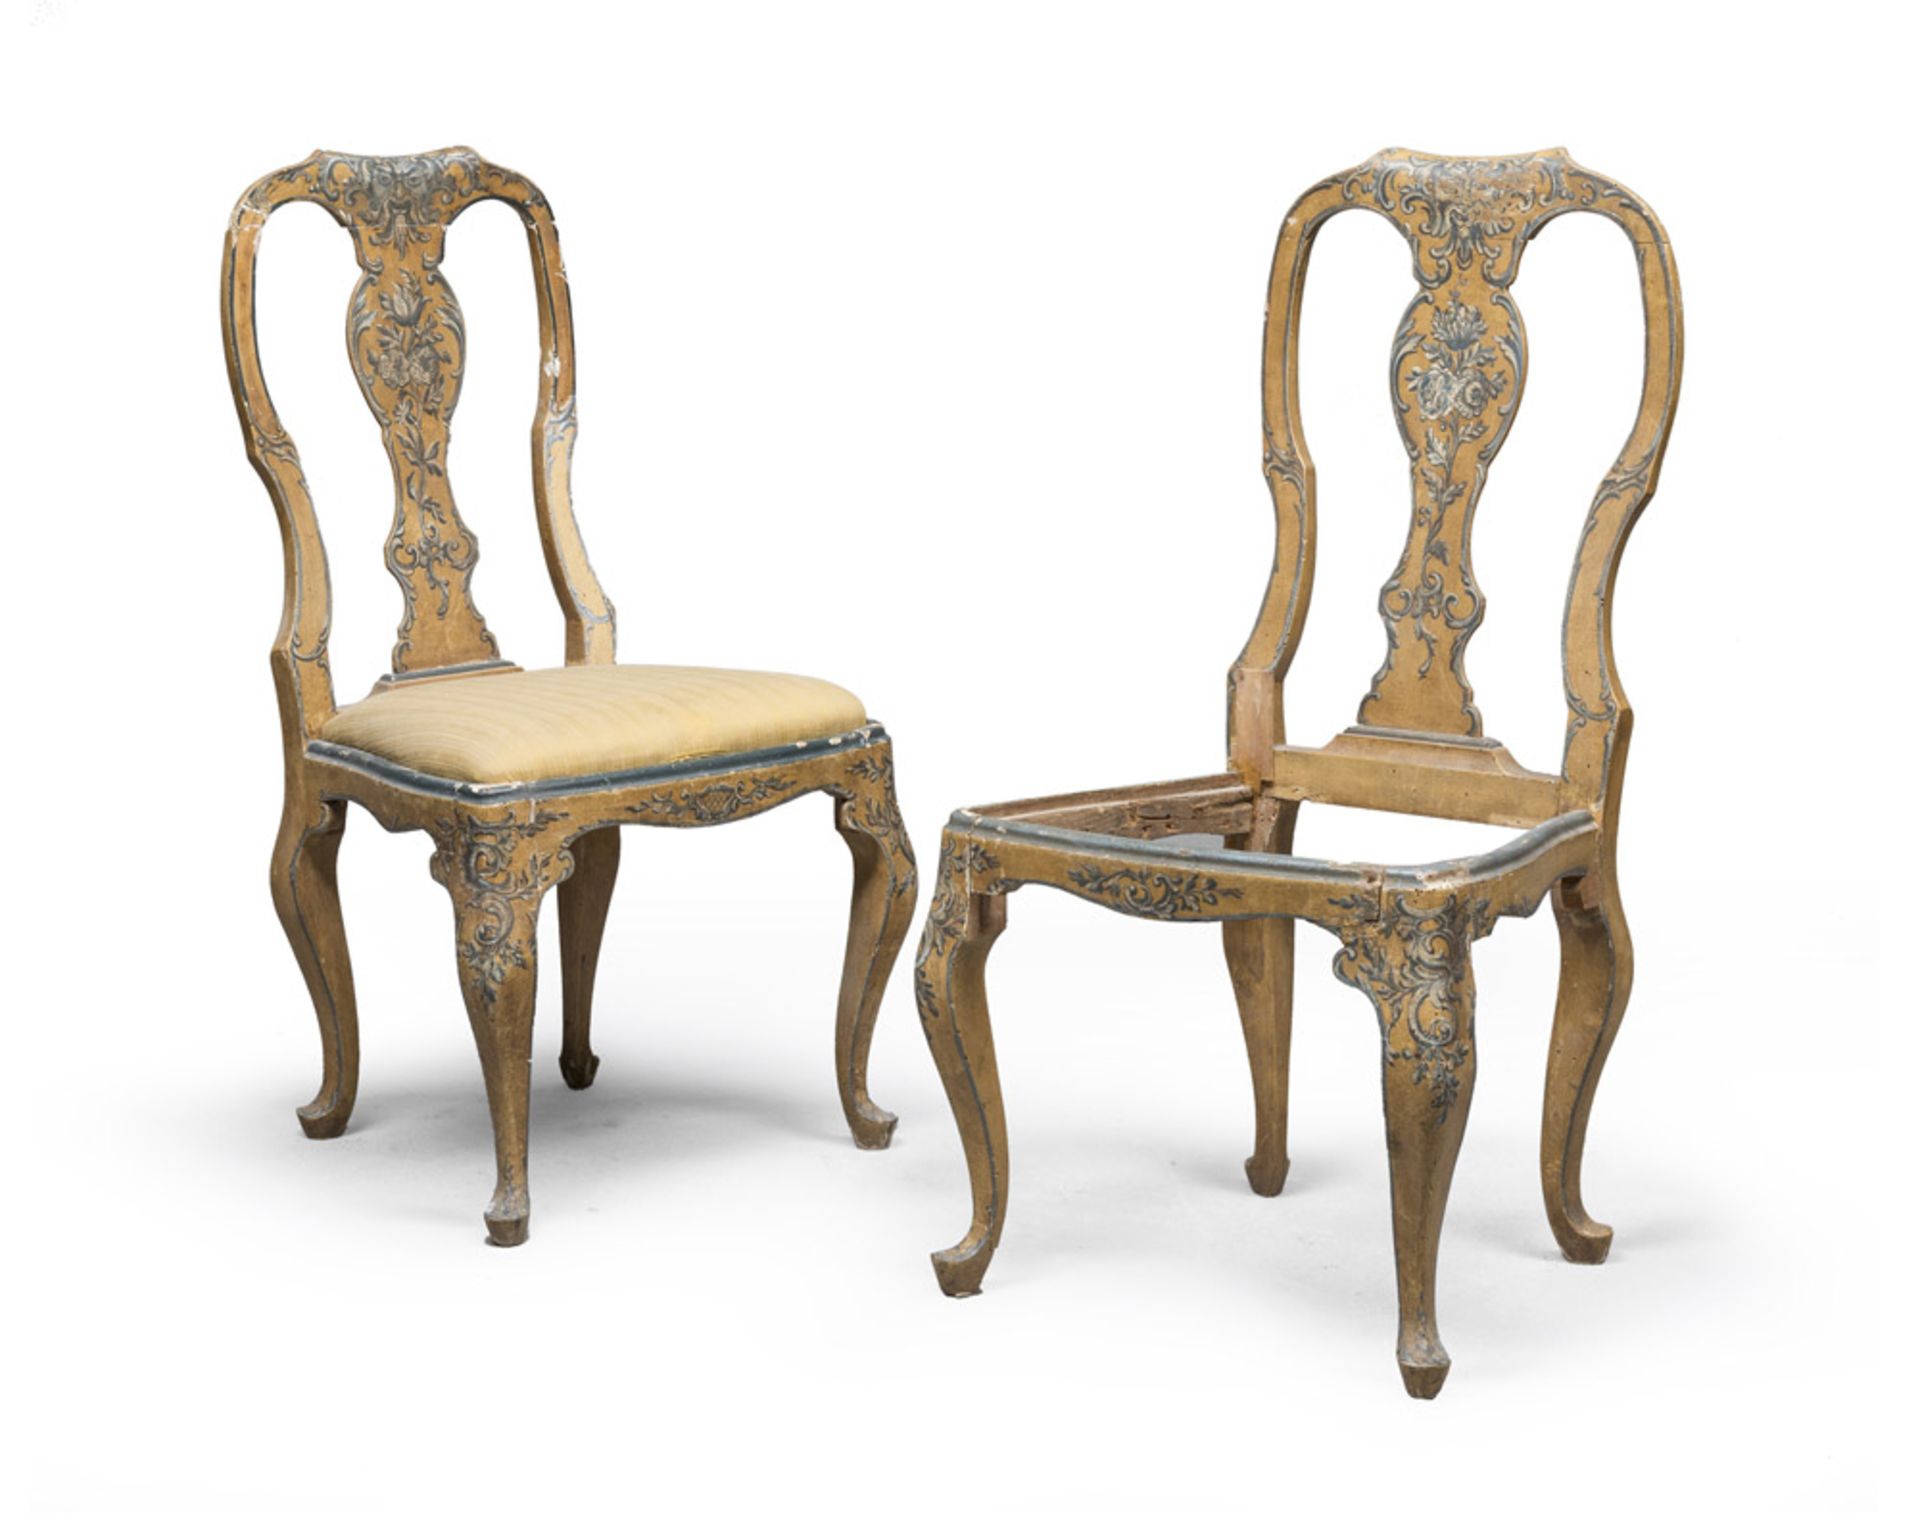 A PAIR OF LACQUERED WOOD CHAIRS, VENICE 18TH CENTURY yellow ground decorated with leaves and